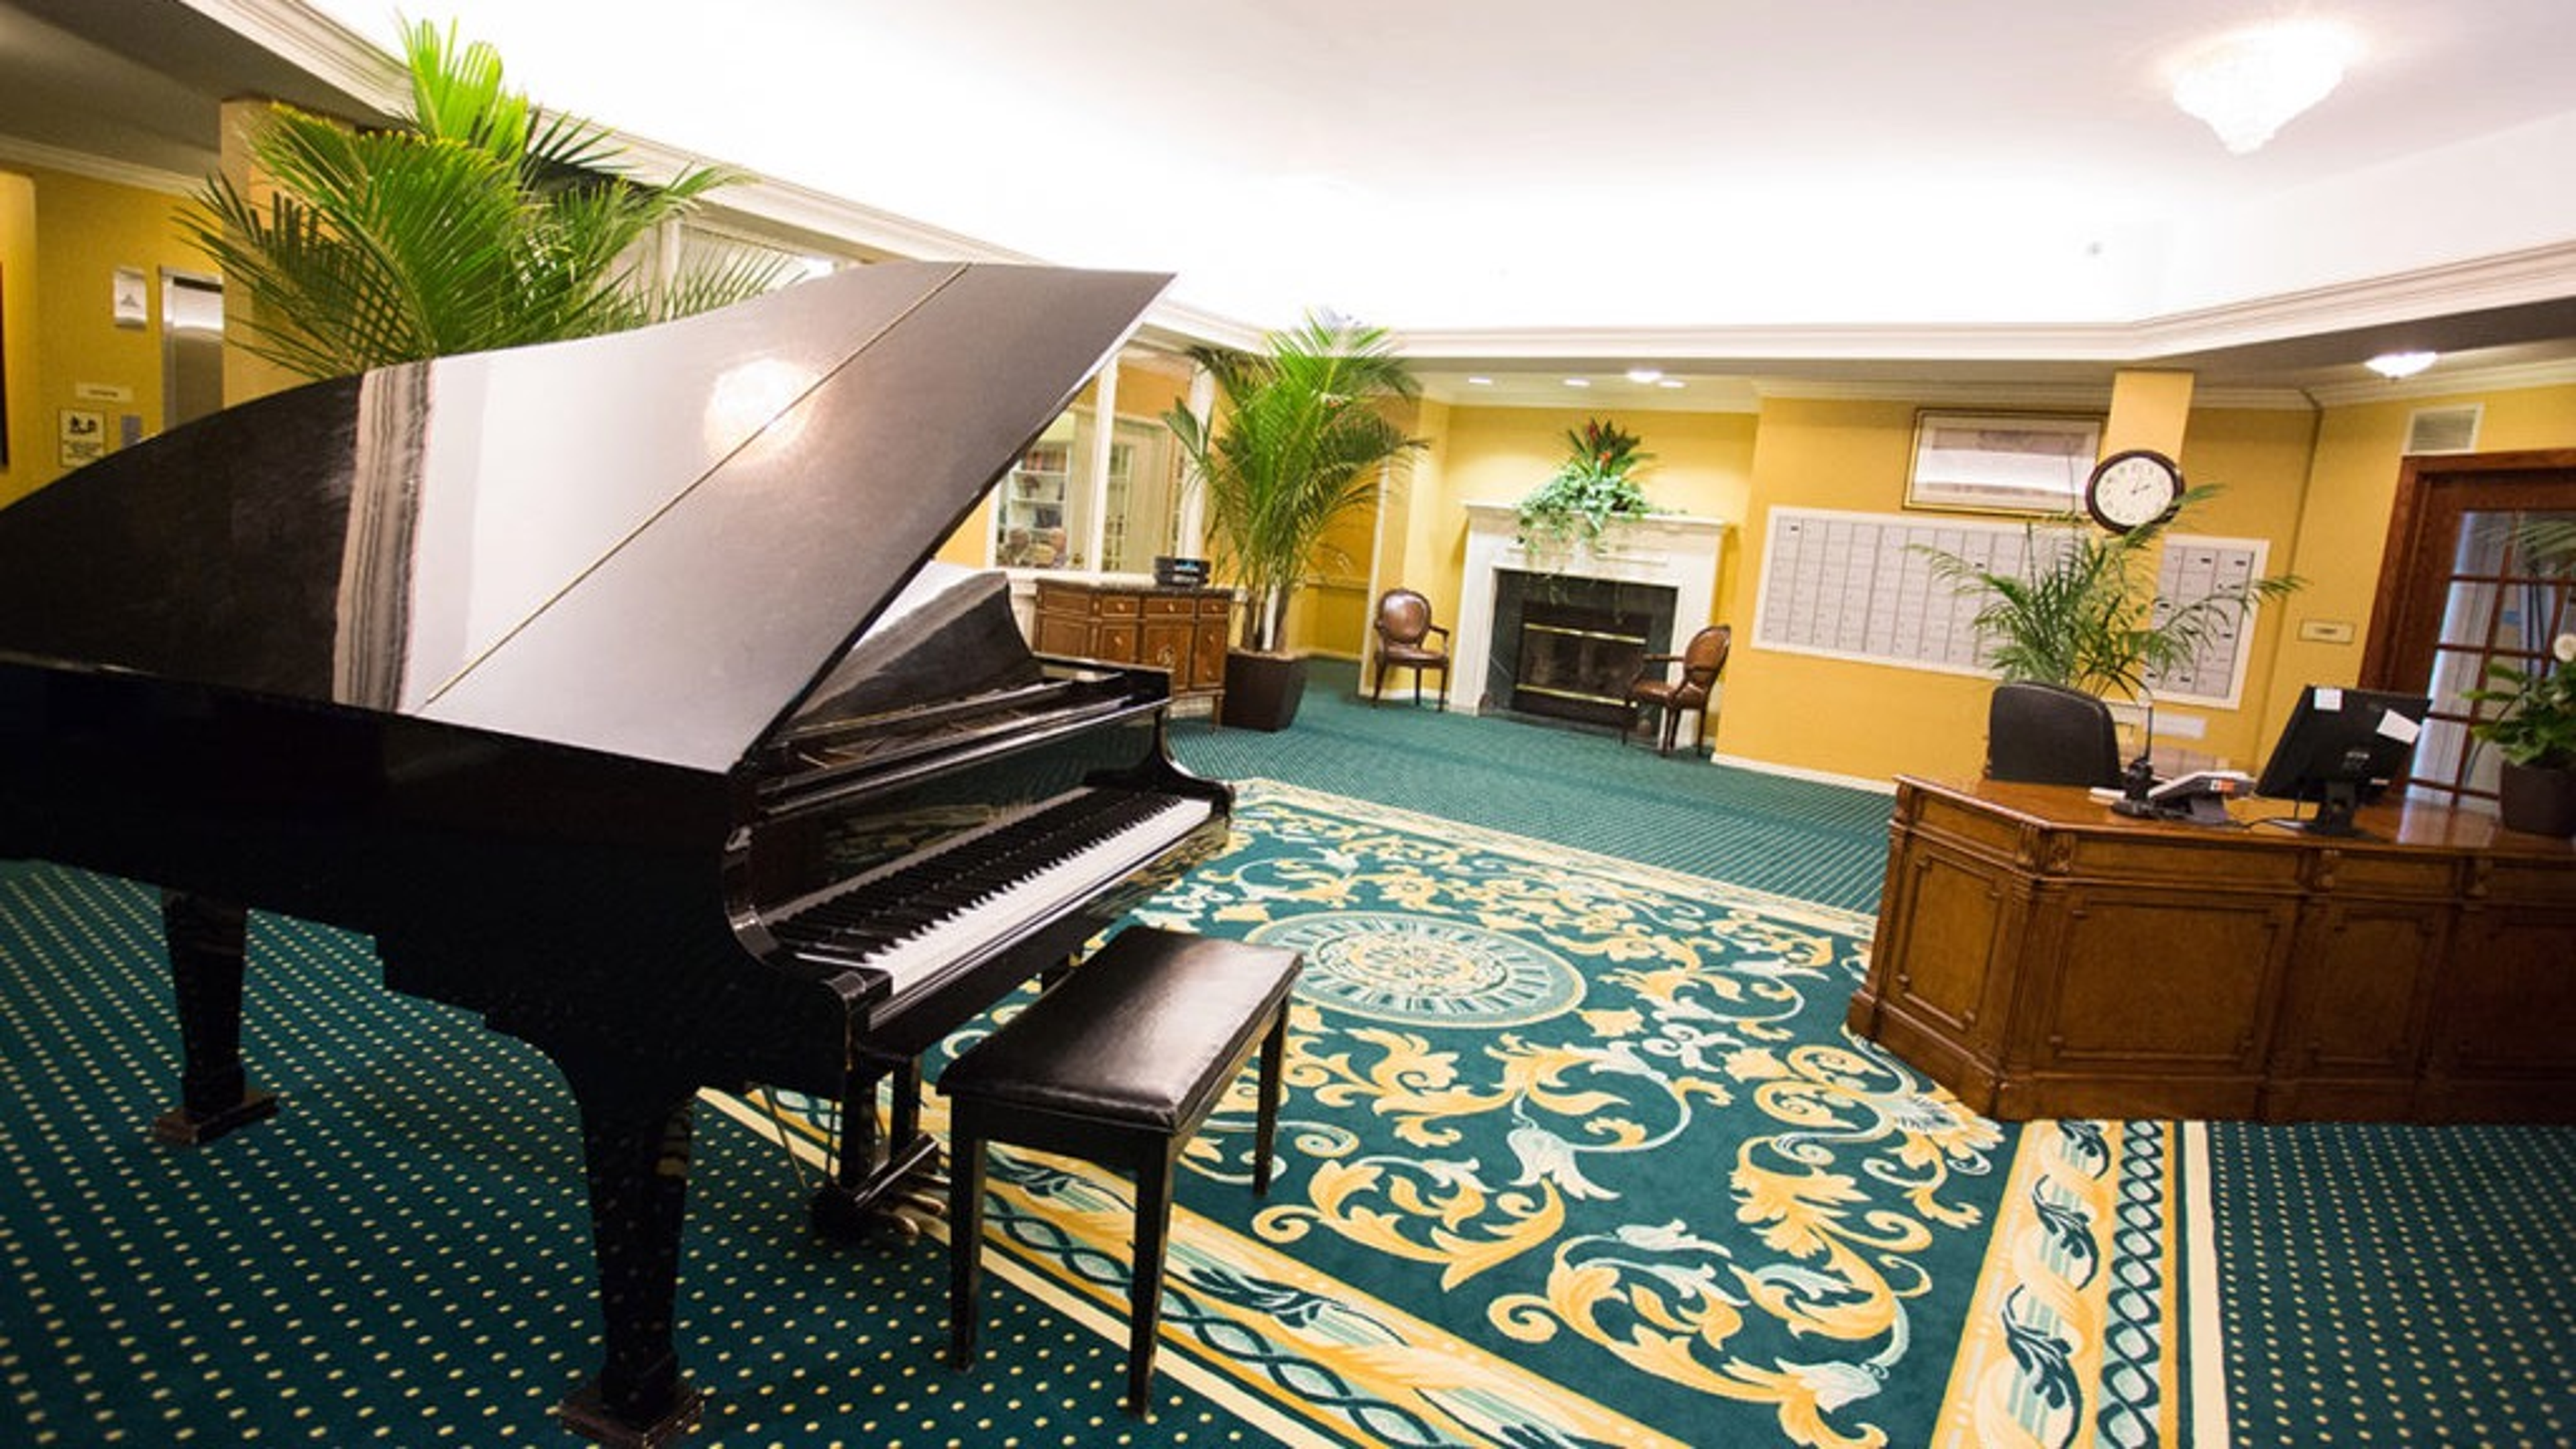 The Gables Music Room